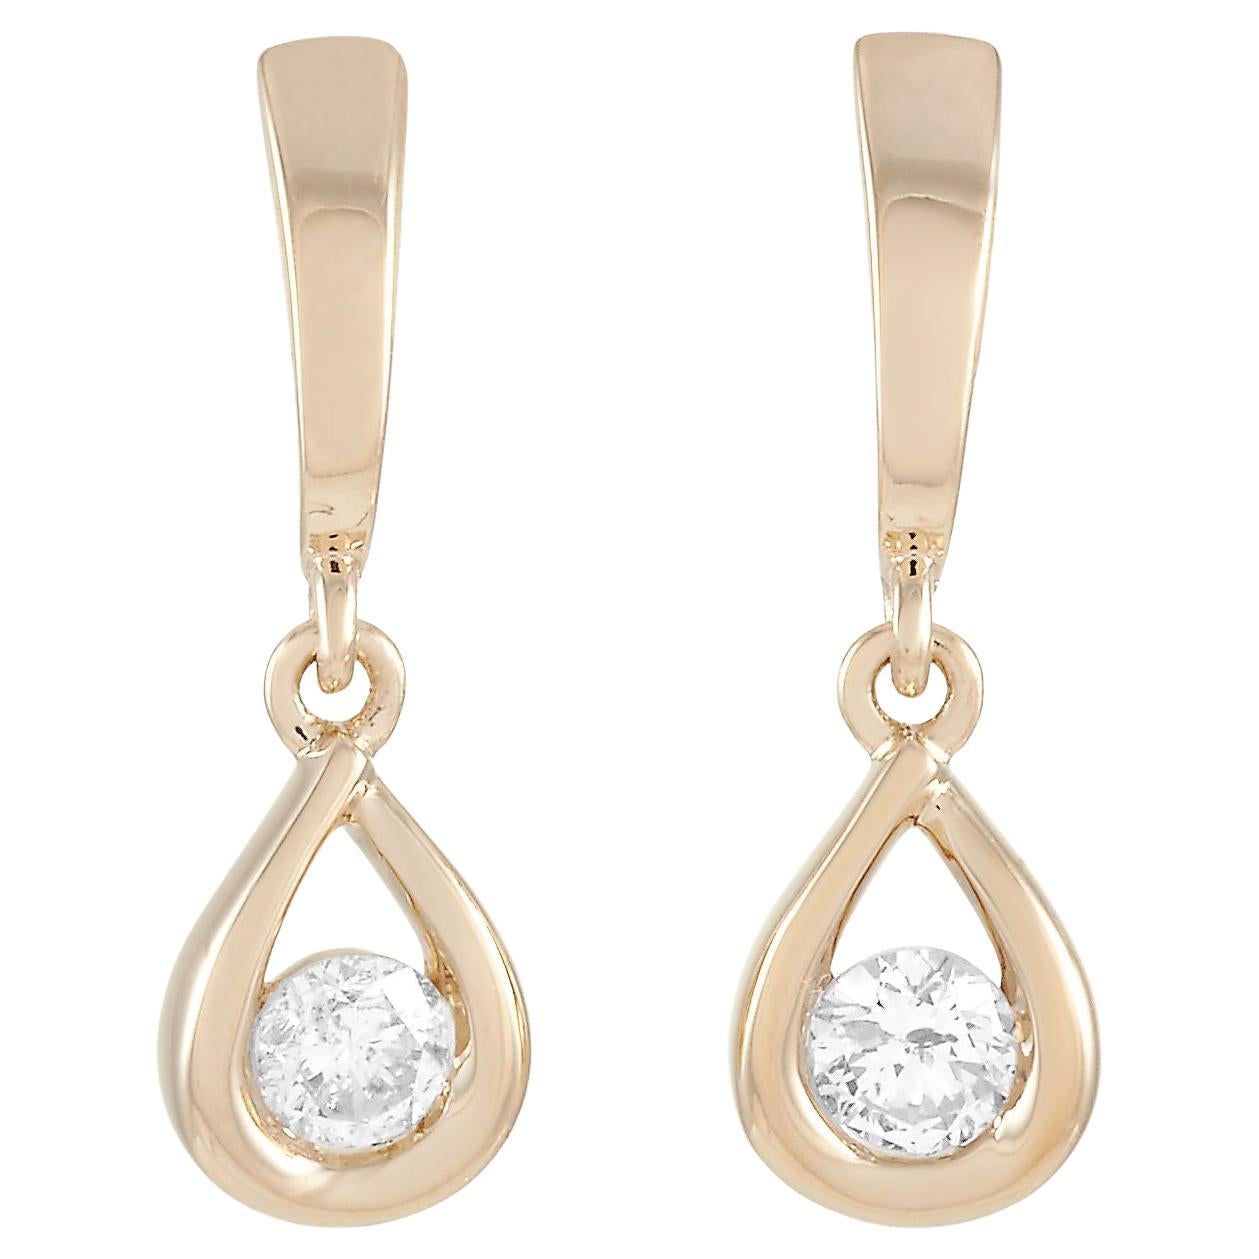 Lb Exclusive 14k Yellow Gold 0.20 Carat Diamond Earrings For Sale